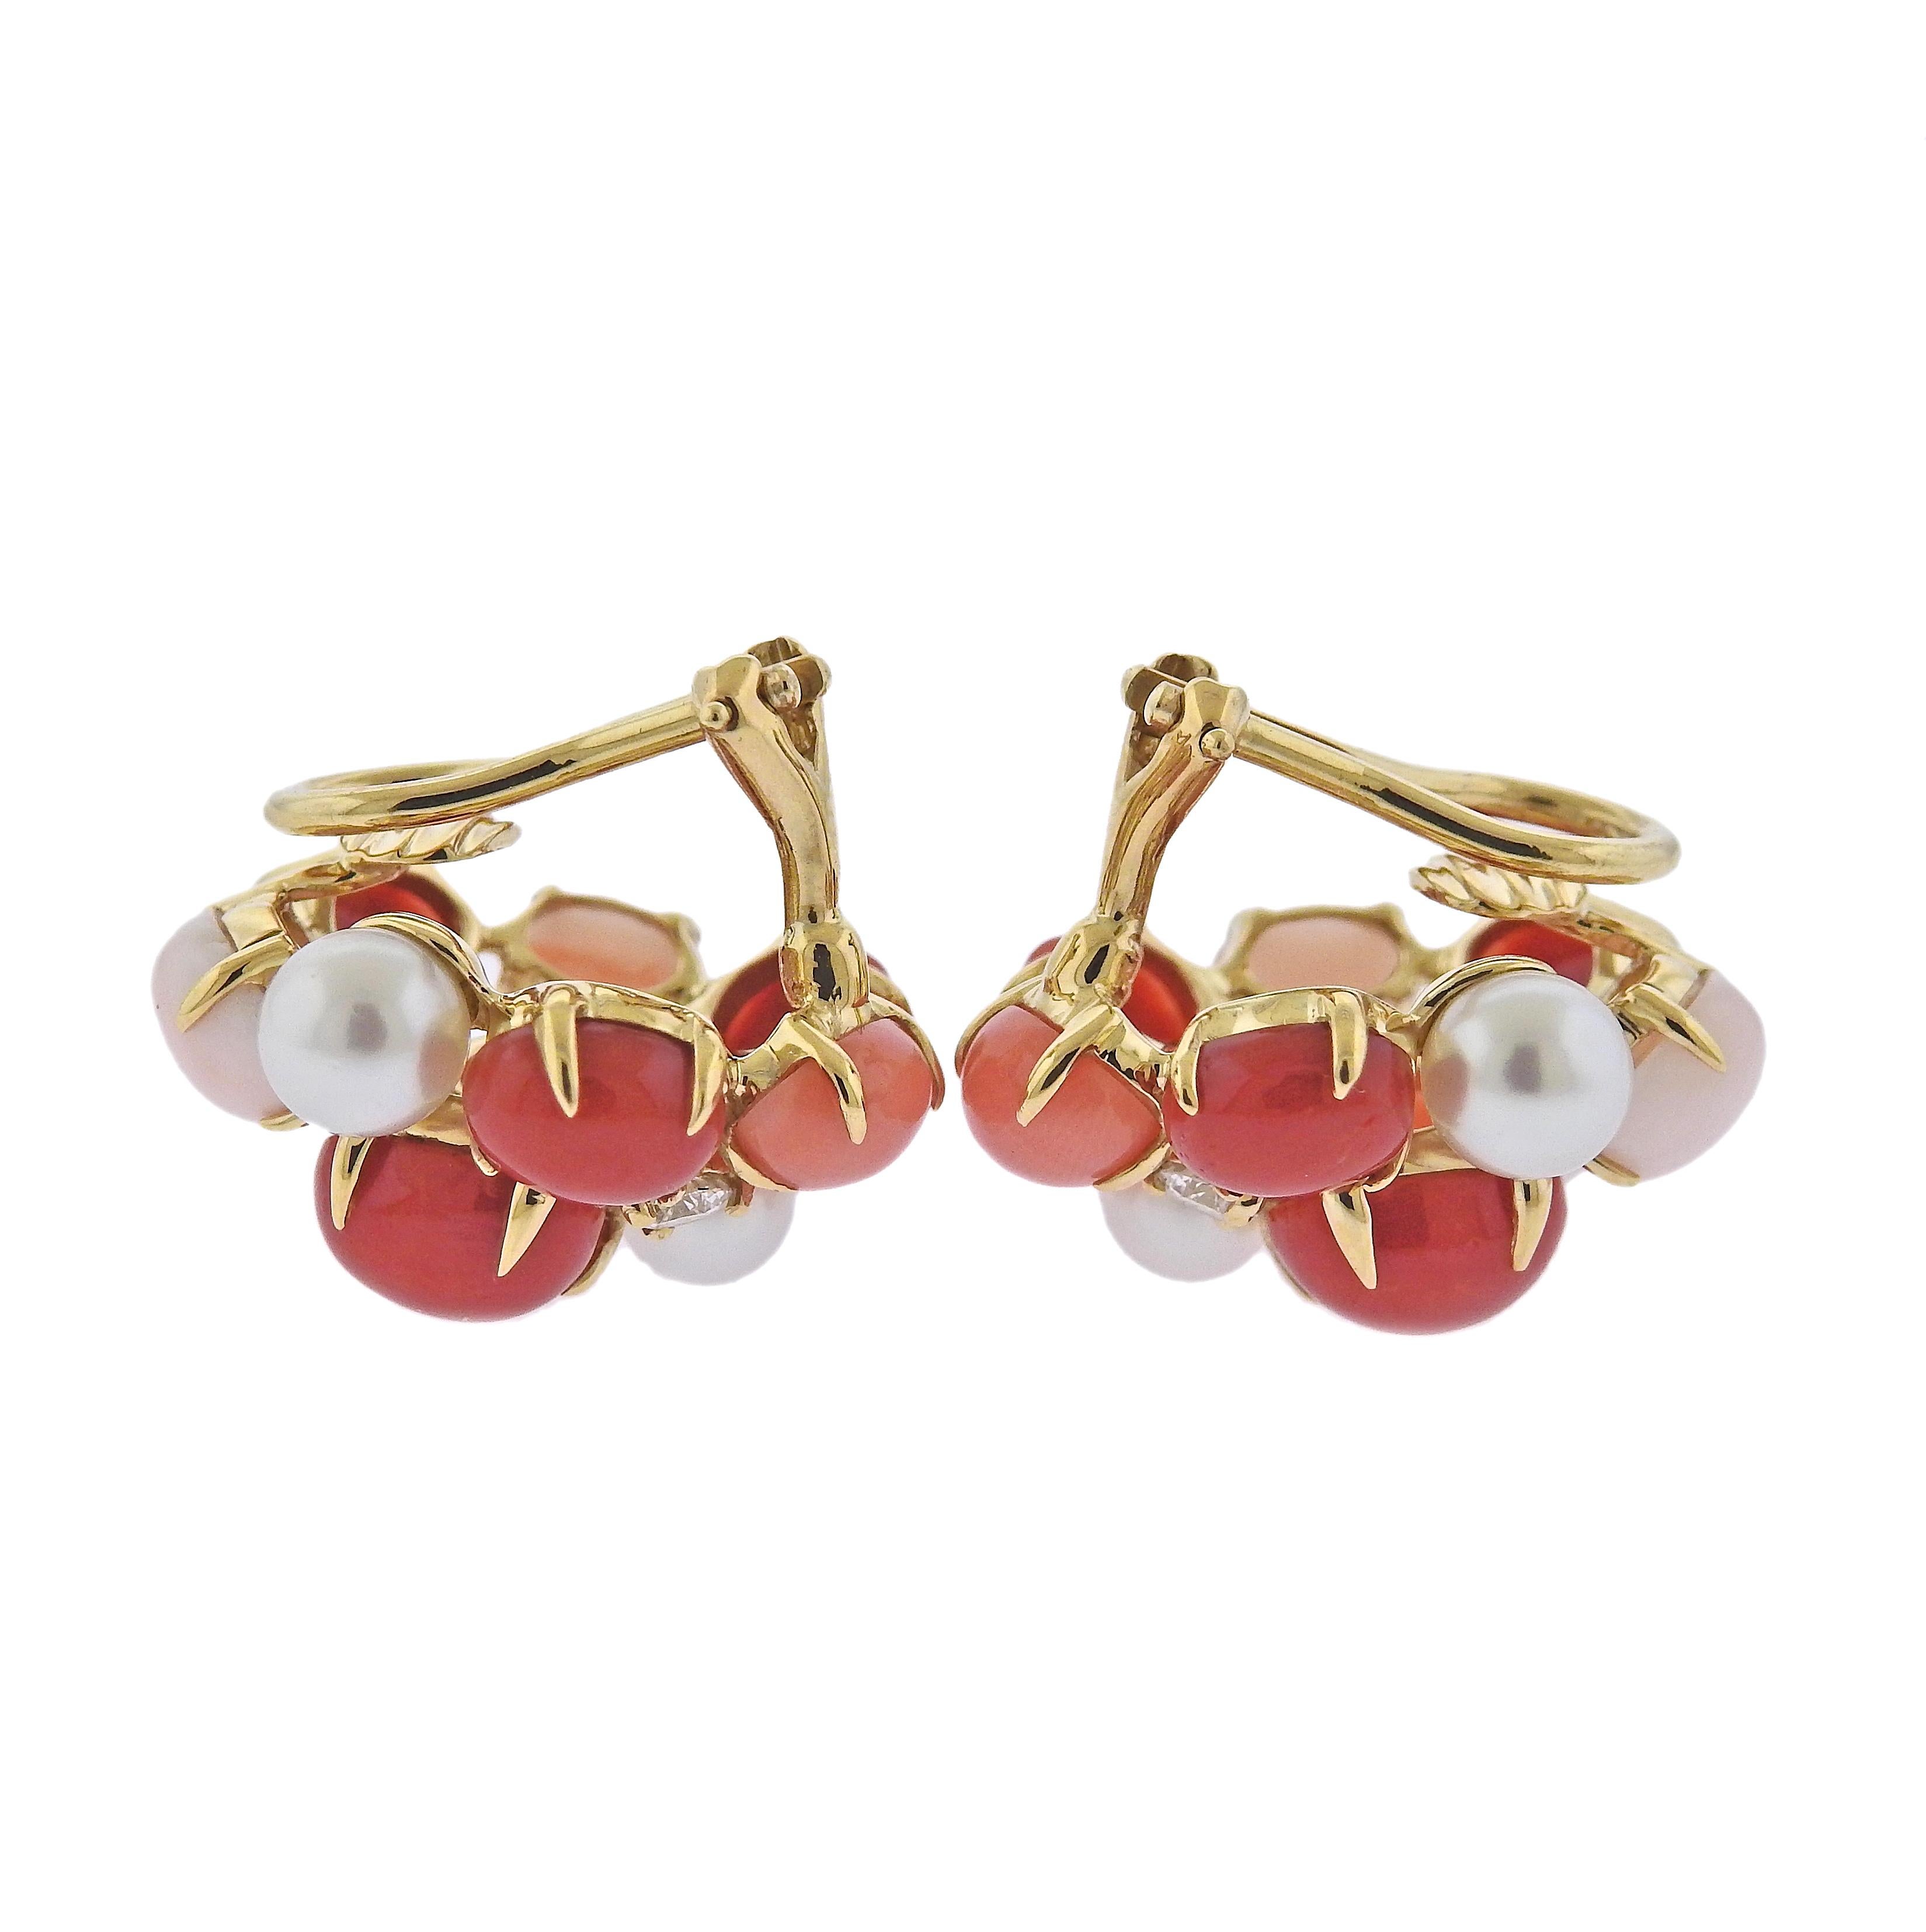 Pair of brand new Seaman Schepps 18k gold Bubble earrings, with 0.28ctw G/VS diamonds, pearls and coral. Come with packaging. Earrings are 21mm x 20mm.Marked: 248444, 750, Shell. Weight - 13 grams.